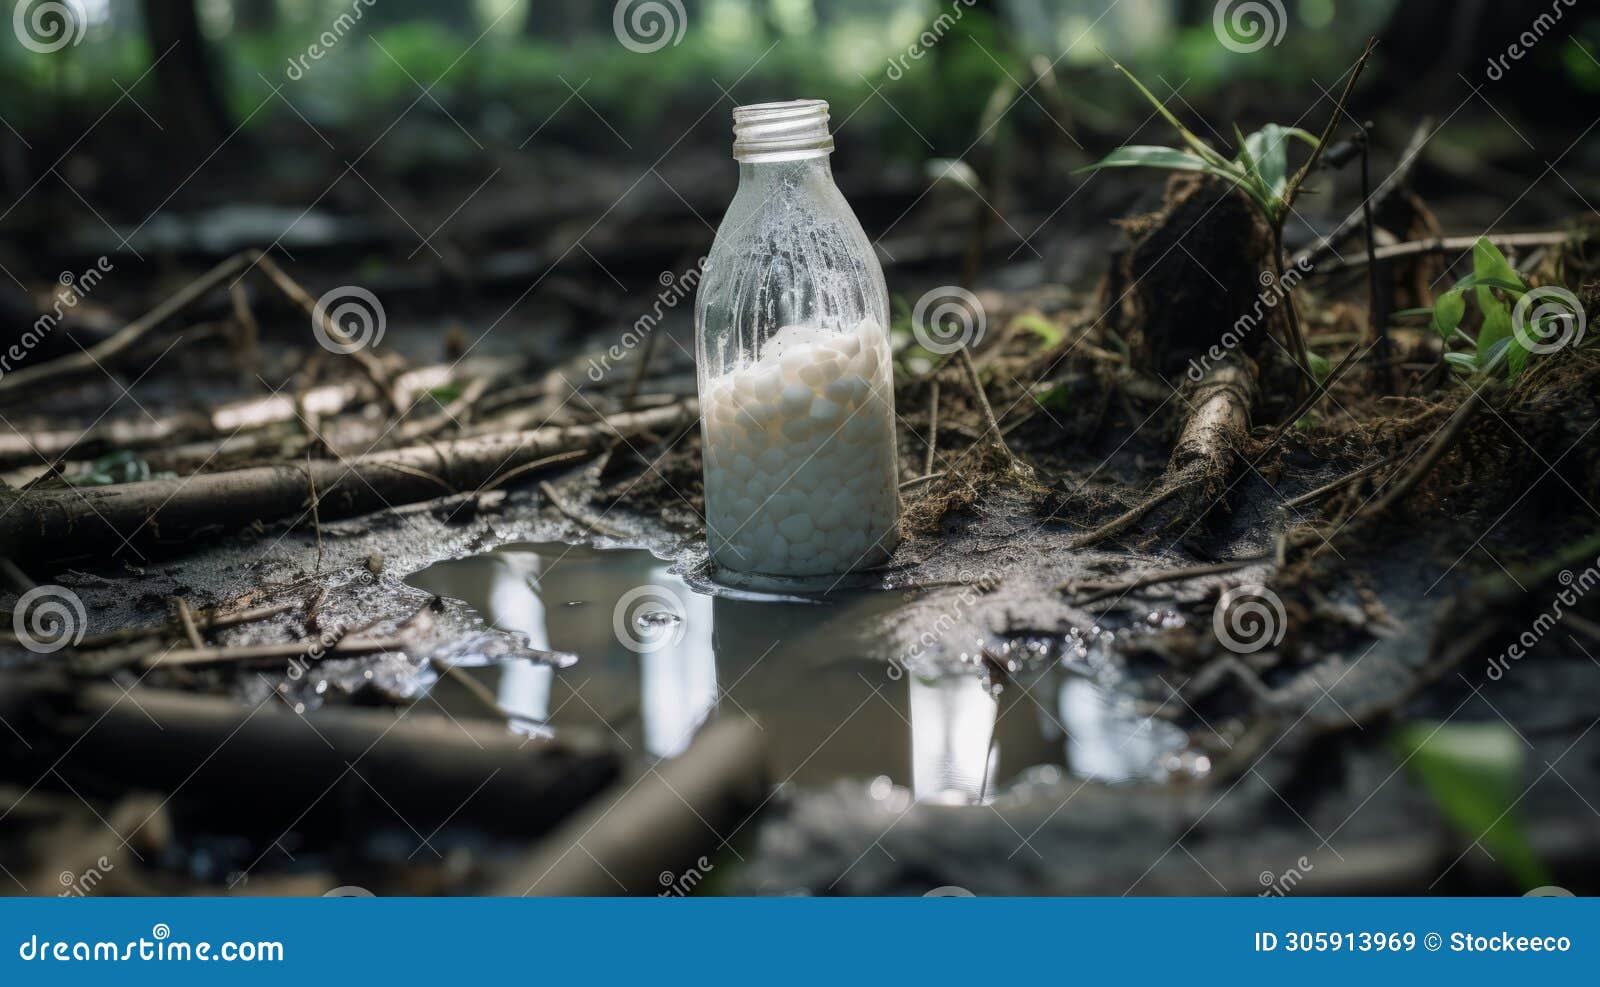 soggy milk: a conceptual installation in the woods